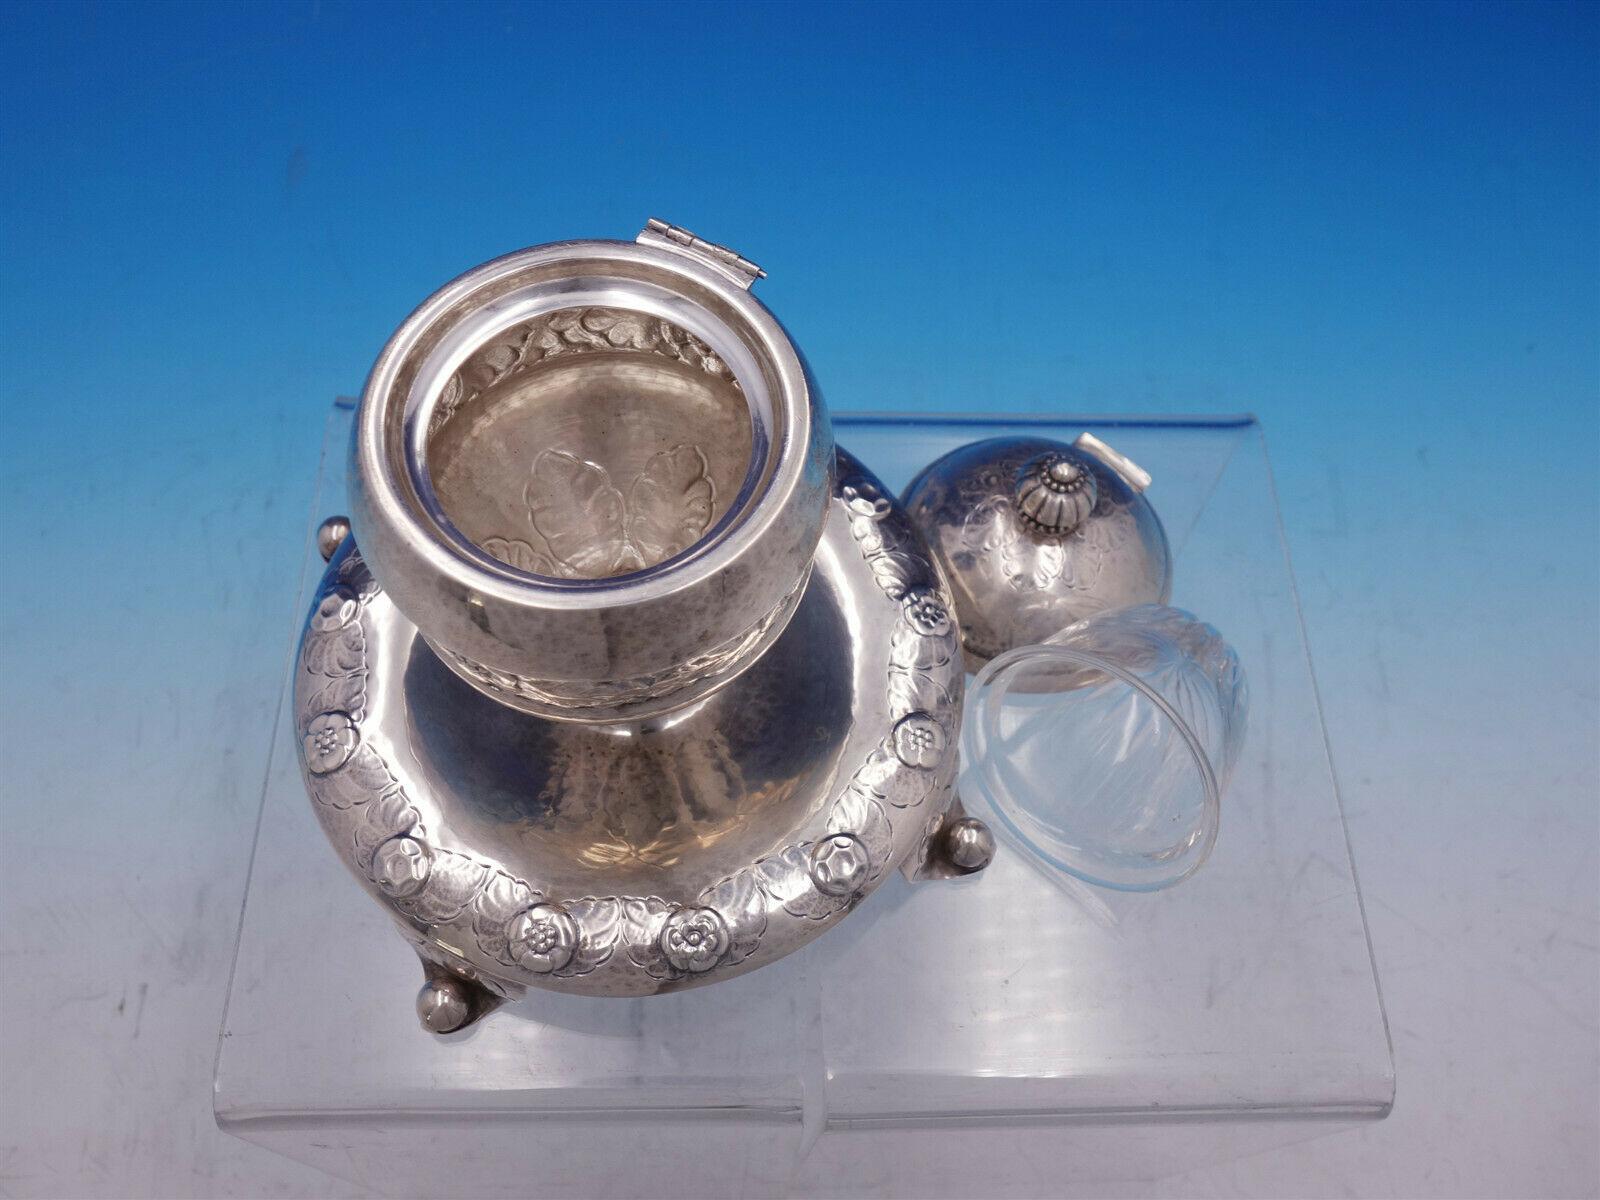 Georg Jensen

Rare Number 142 by Georg Jensen 830 silver egg shaped inkwell with glass insert, dated by Jensen 1920. It measures 5 1/2